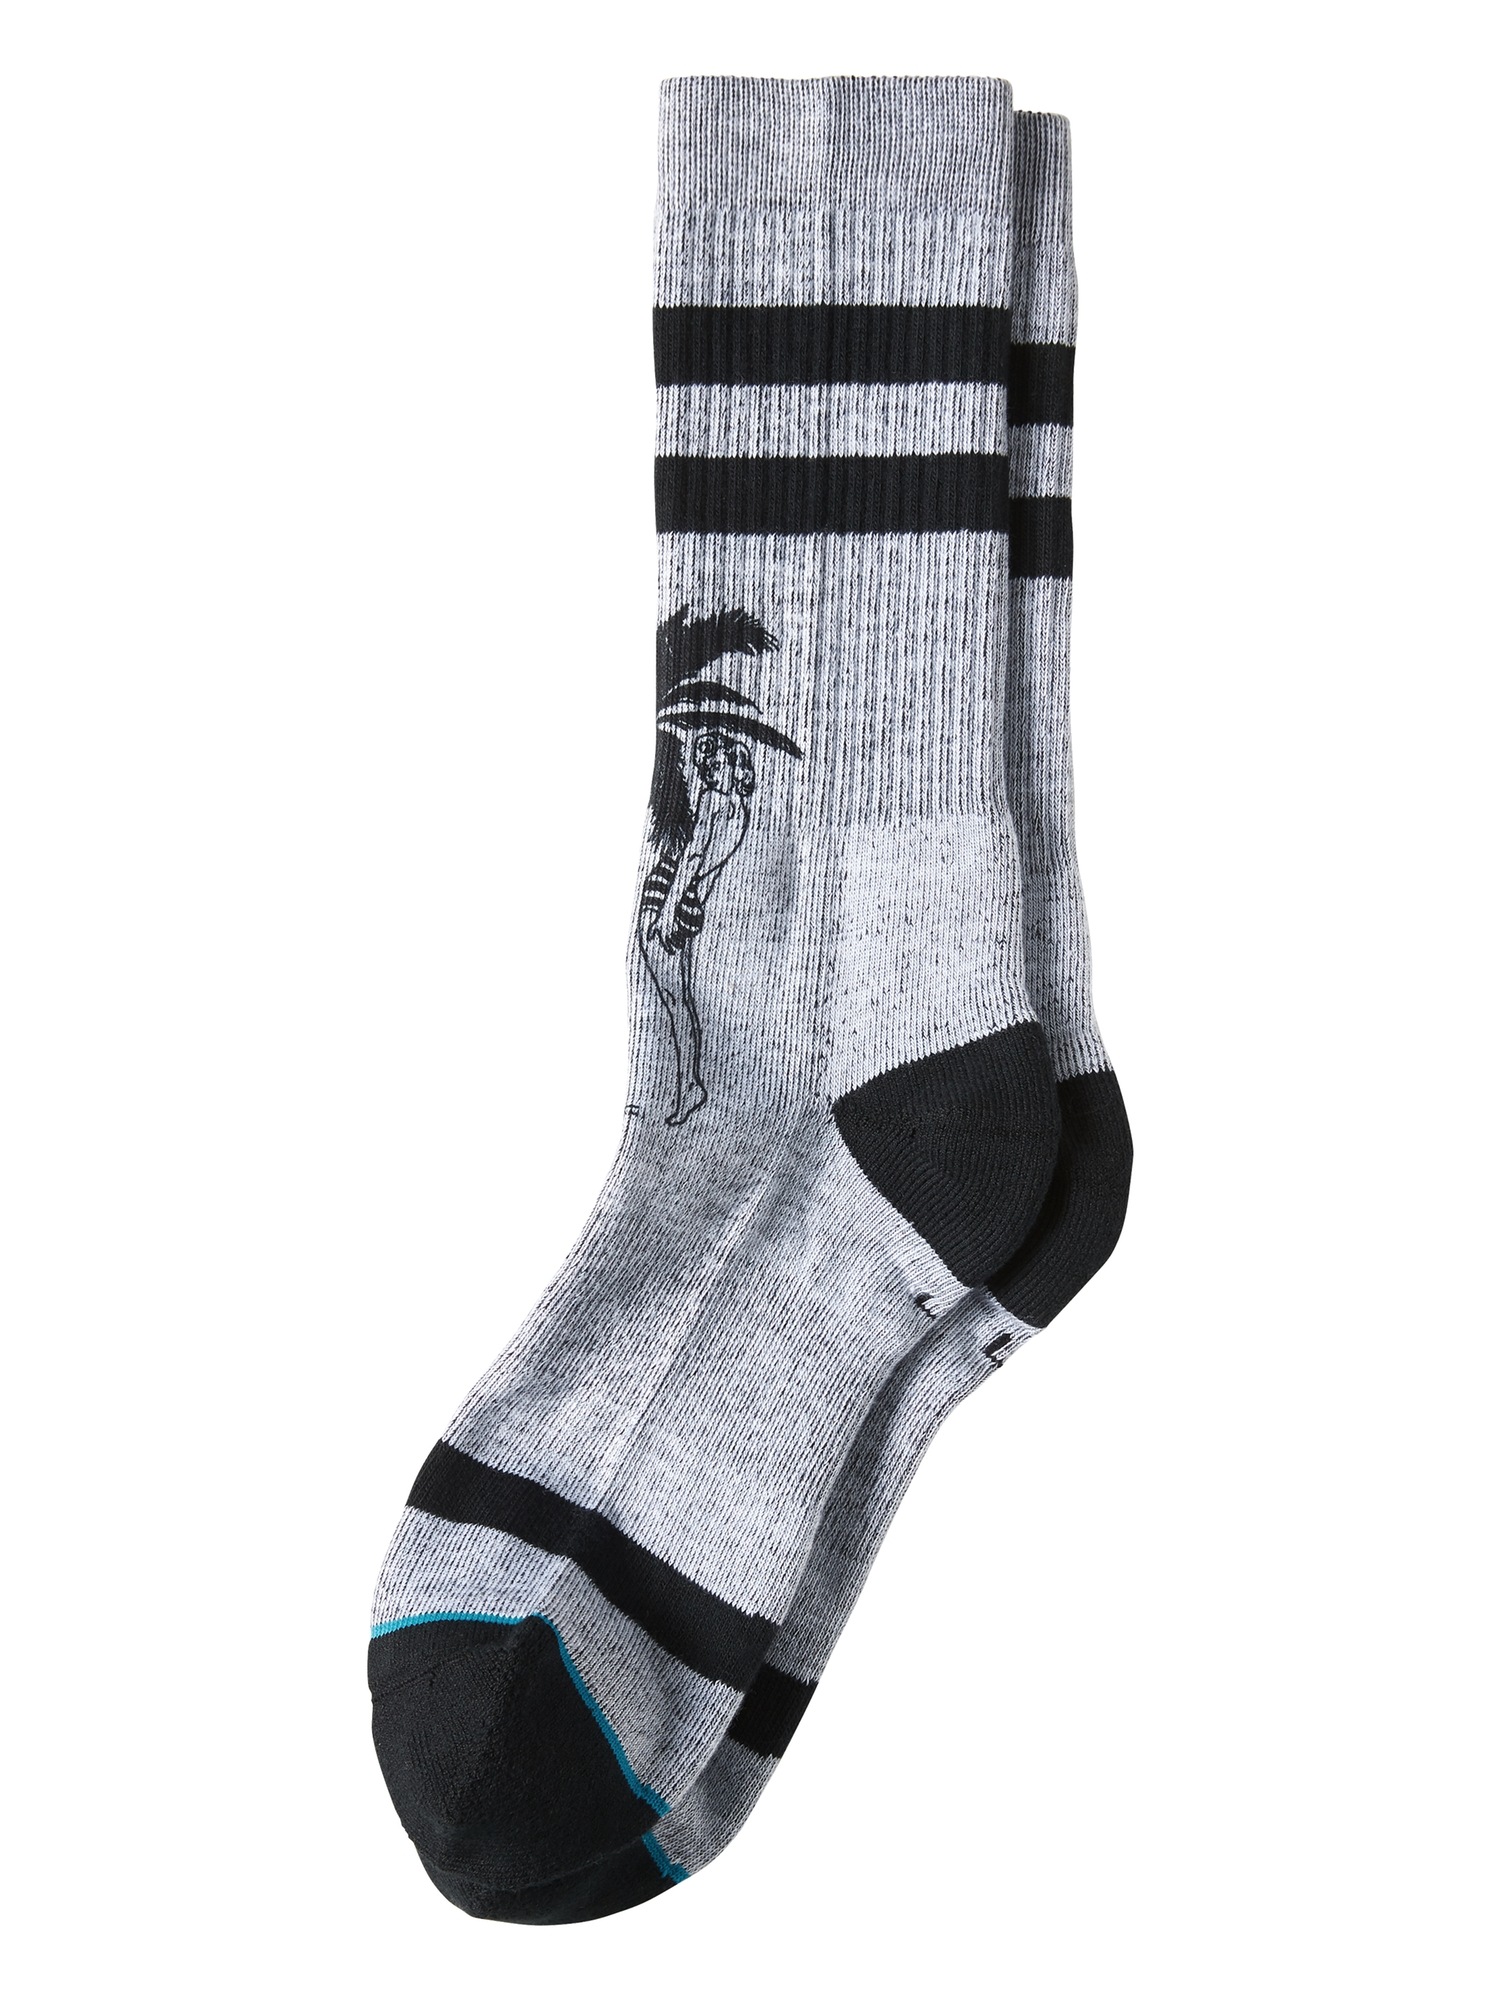 Stance &#124 Cheeky Palm Classic Crew Sock